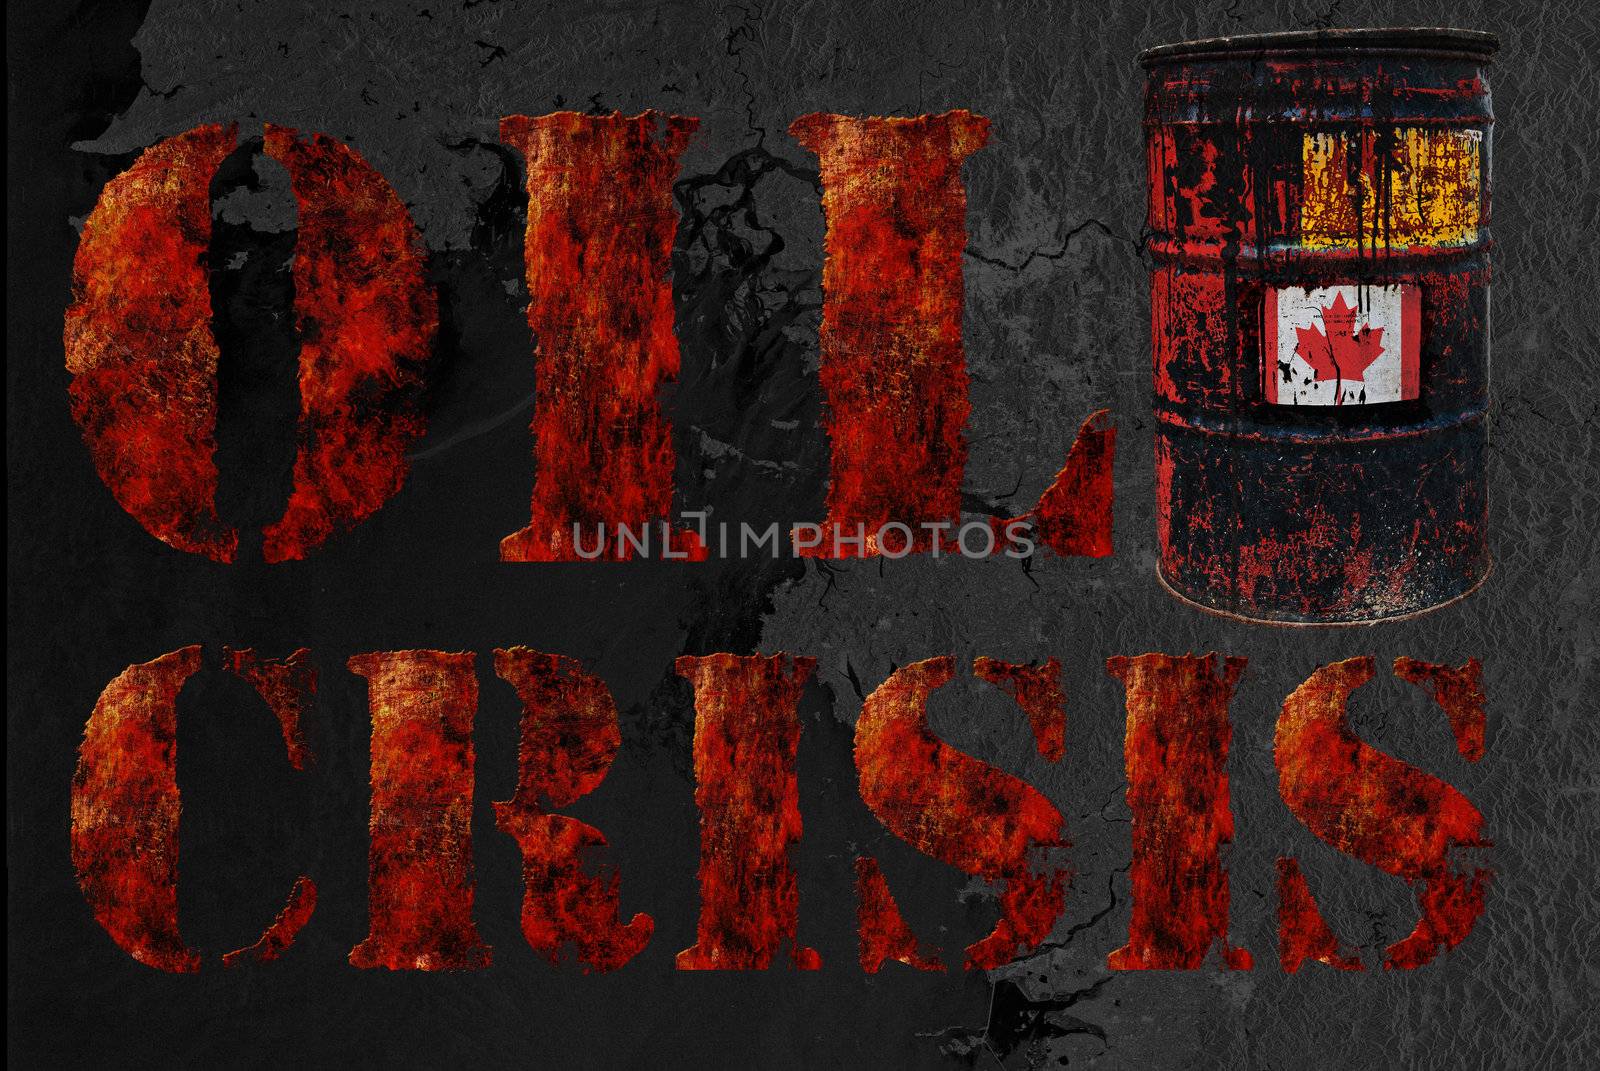 Global economic oil crisis with vintage rusty oil drum and grudge text background. Suitable for all oil crisis economic business concept, logo, icon design. With Canada flag.